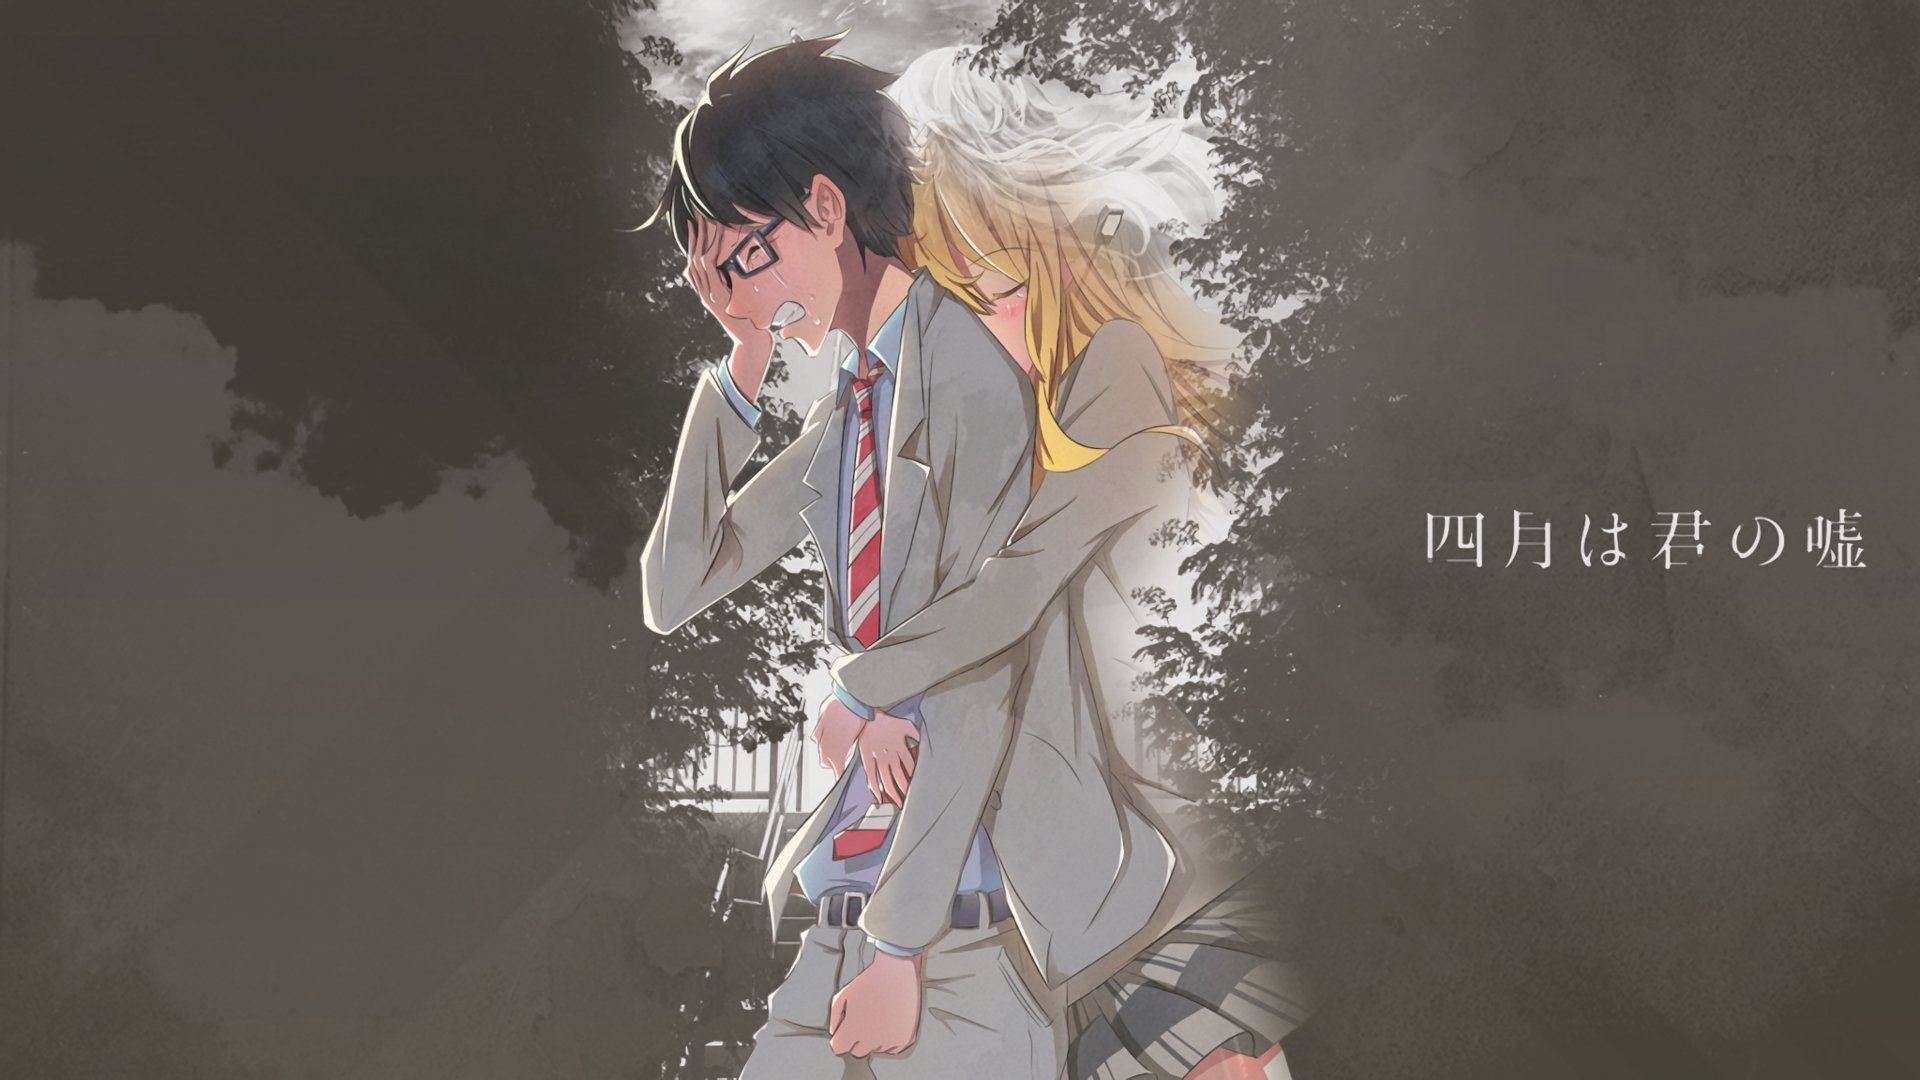 1920x1080 Your Lie In April Wallpaper Background Image. 